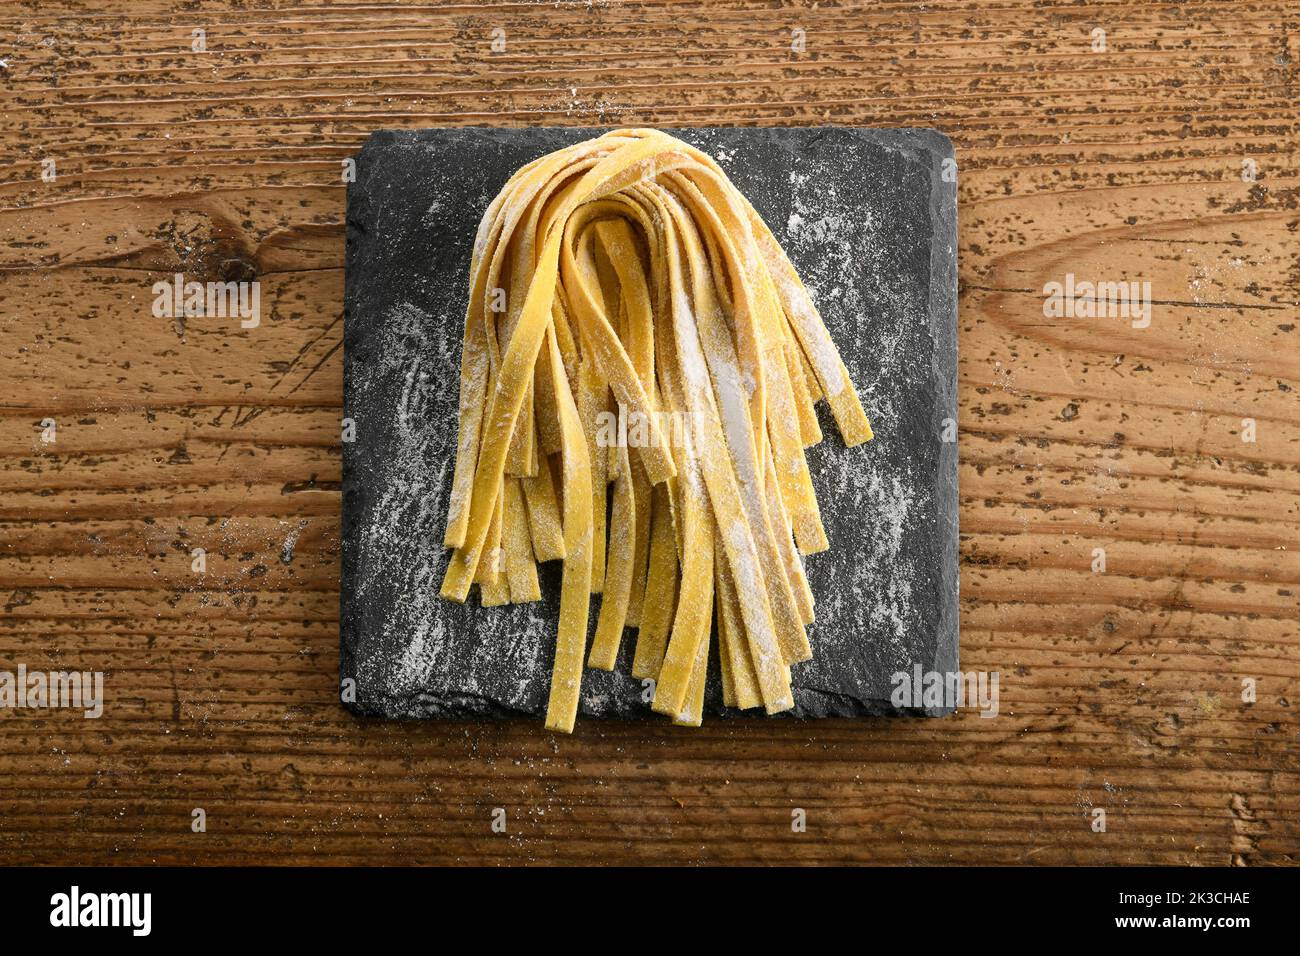 Top view of freshly prepared raw homemade Italian tagliatelle pasta with flour placed on slate board on wooden table in kitchen Stock Photo